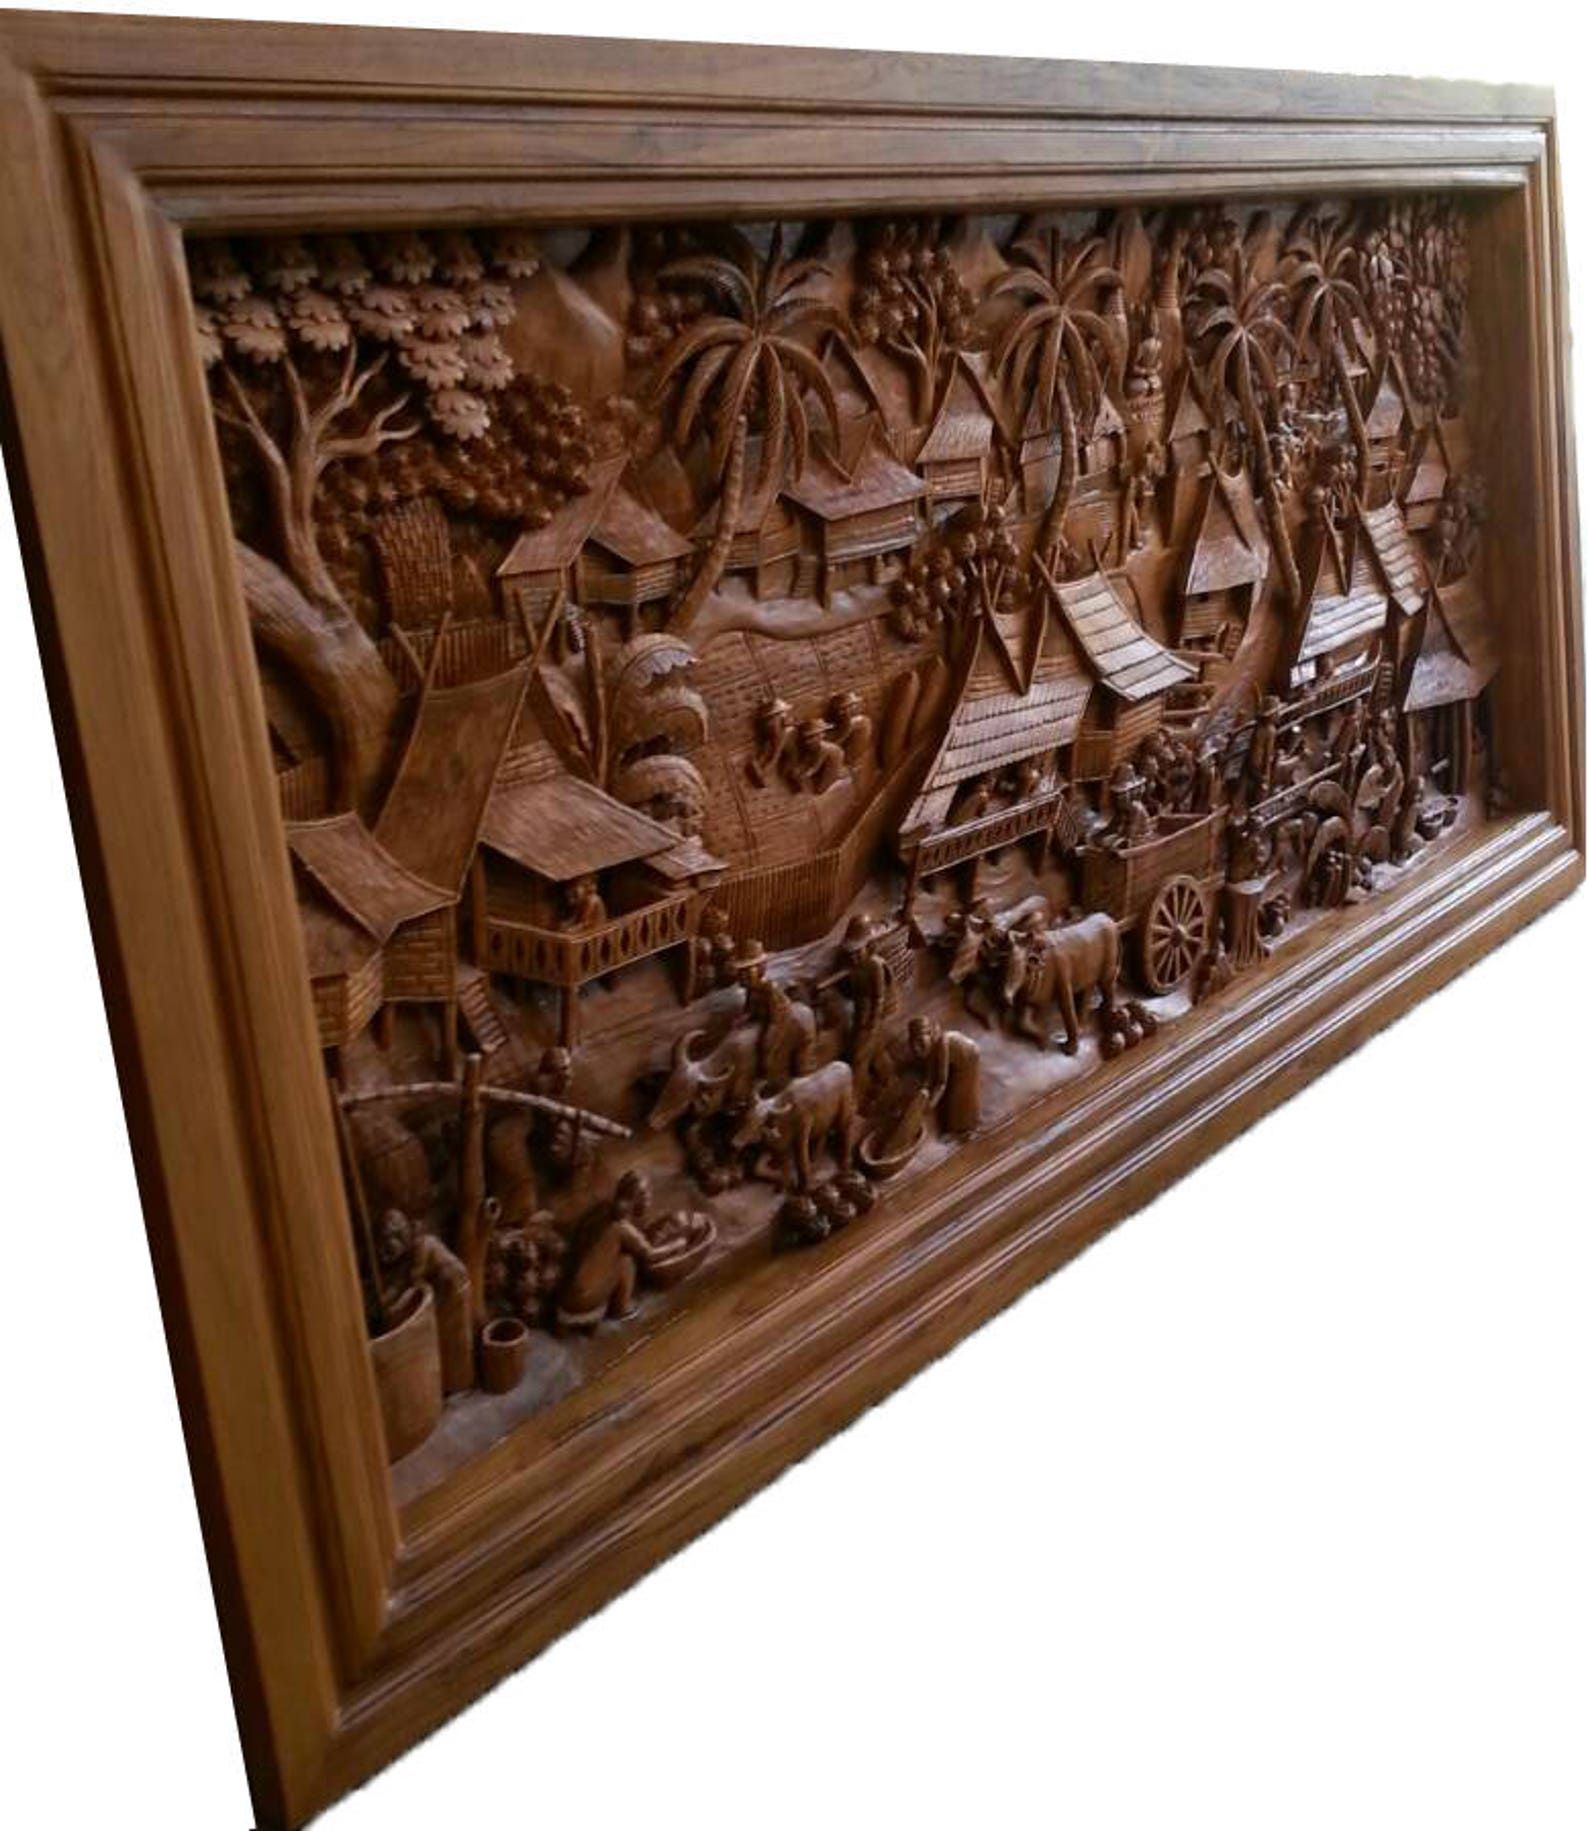 Large Carved Teak Wood Wall Art Decor 3d Panel With Pertaining To Newest Waves Wood Wall Art (View 10 of 20)